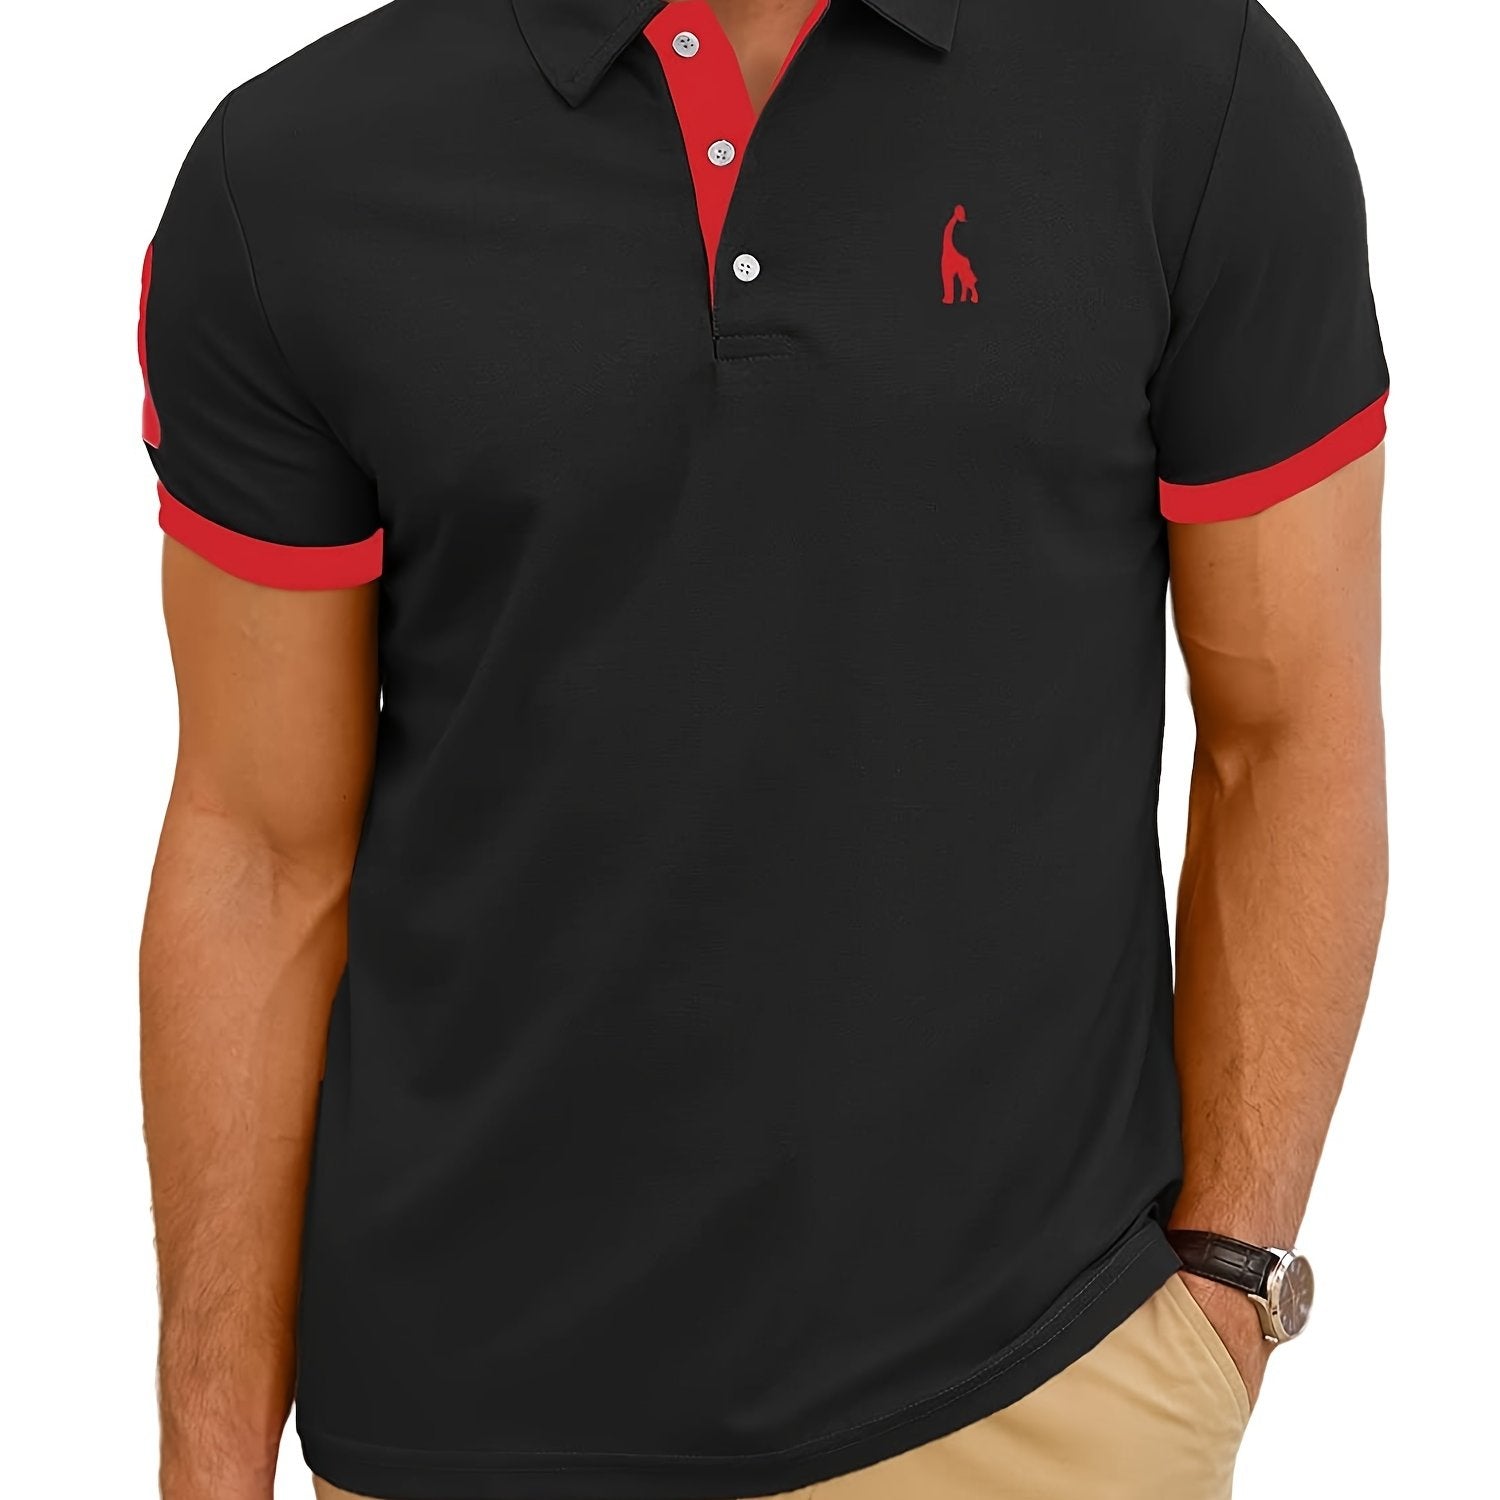 「lovevop」Men's Casual Slim Fit Embroidered Striped Polo Shirt